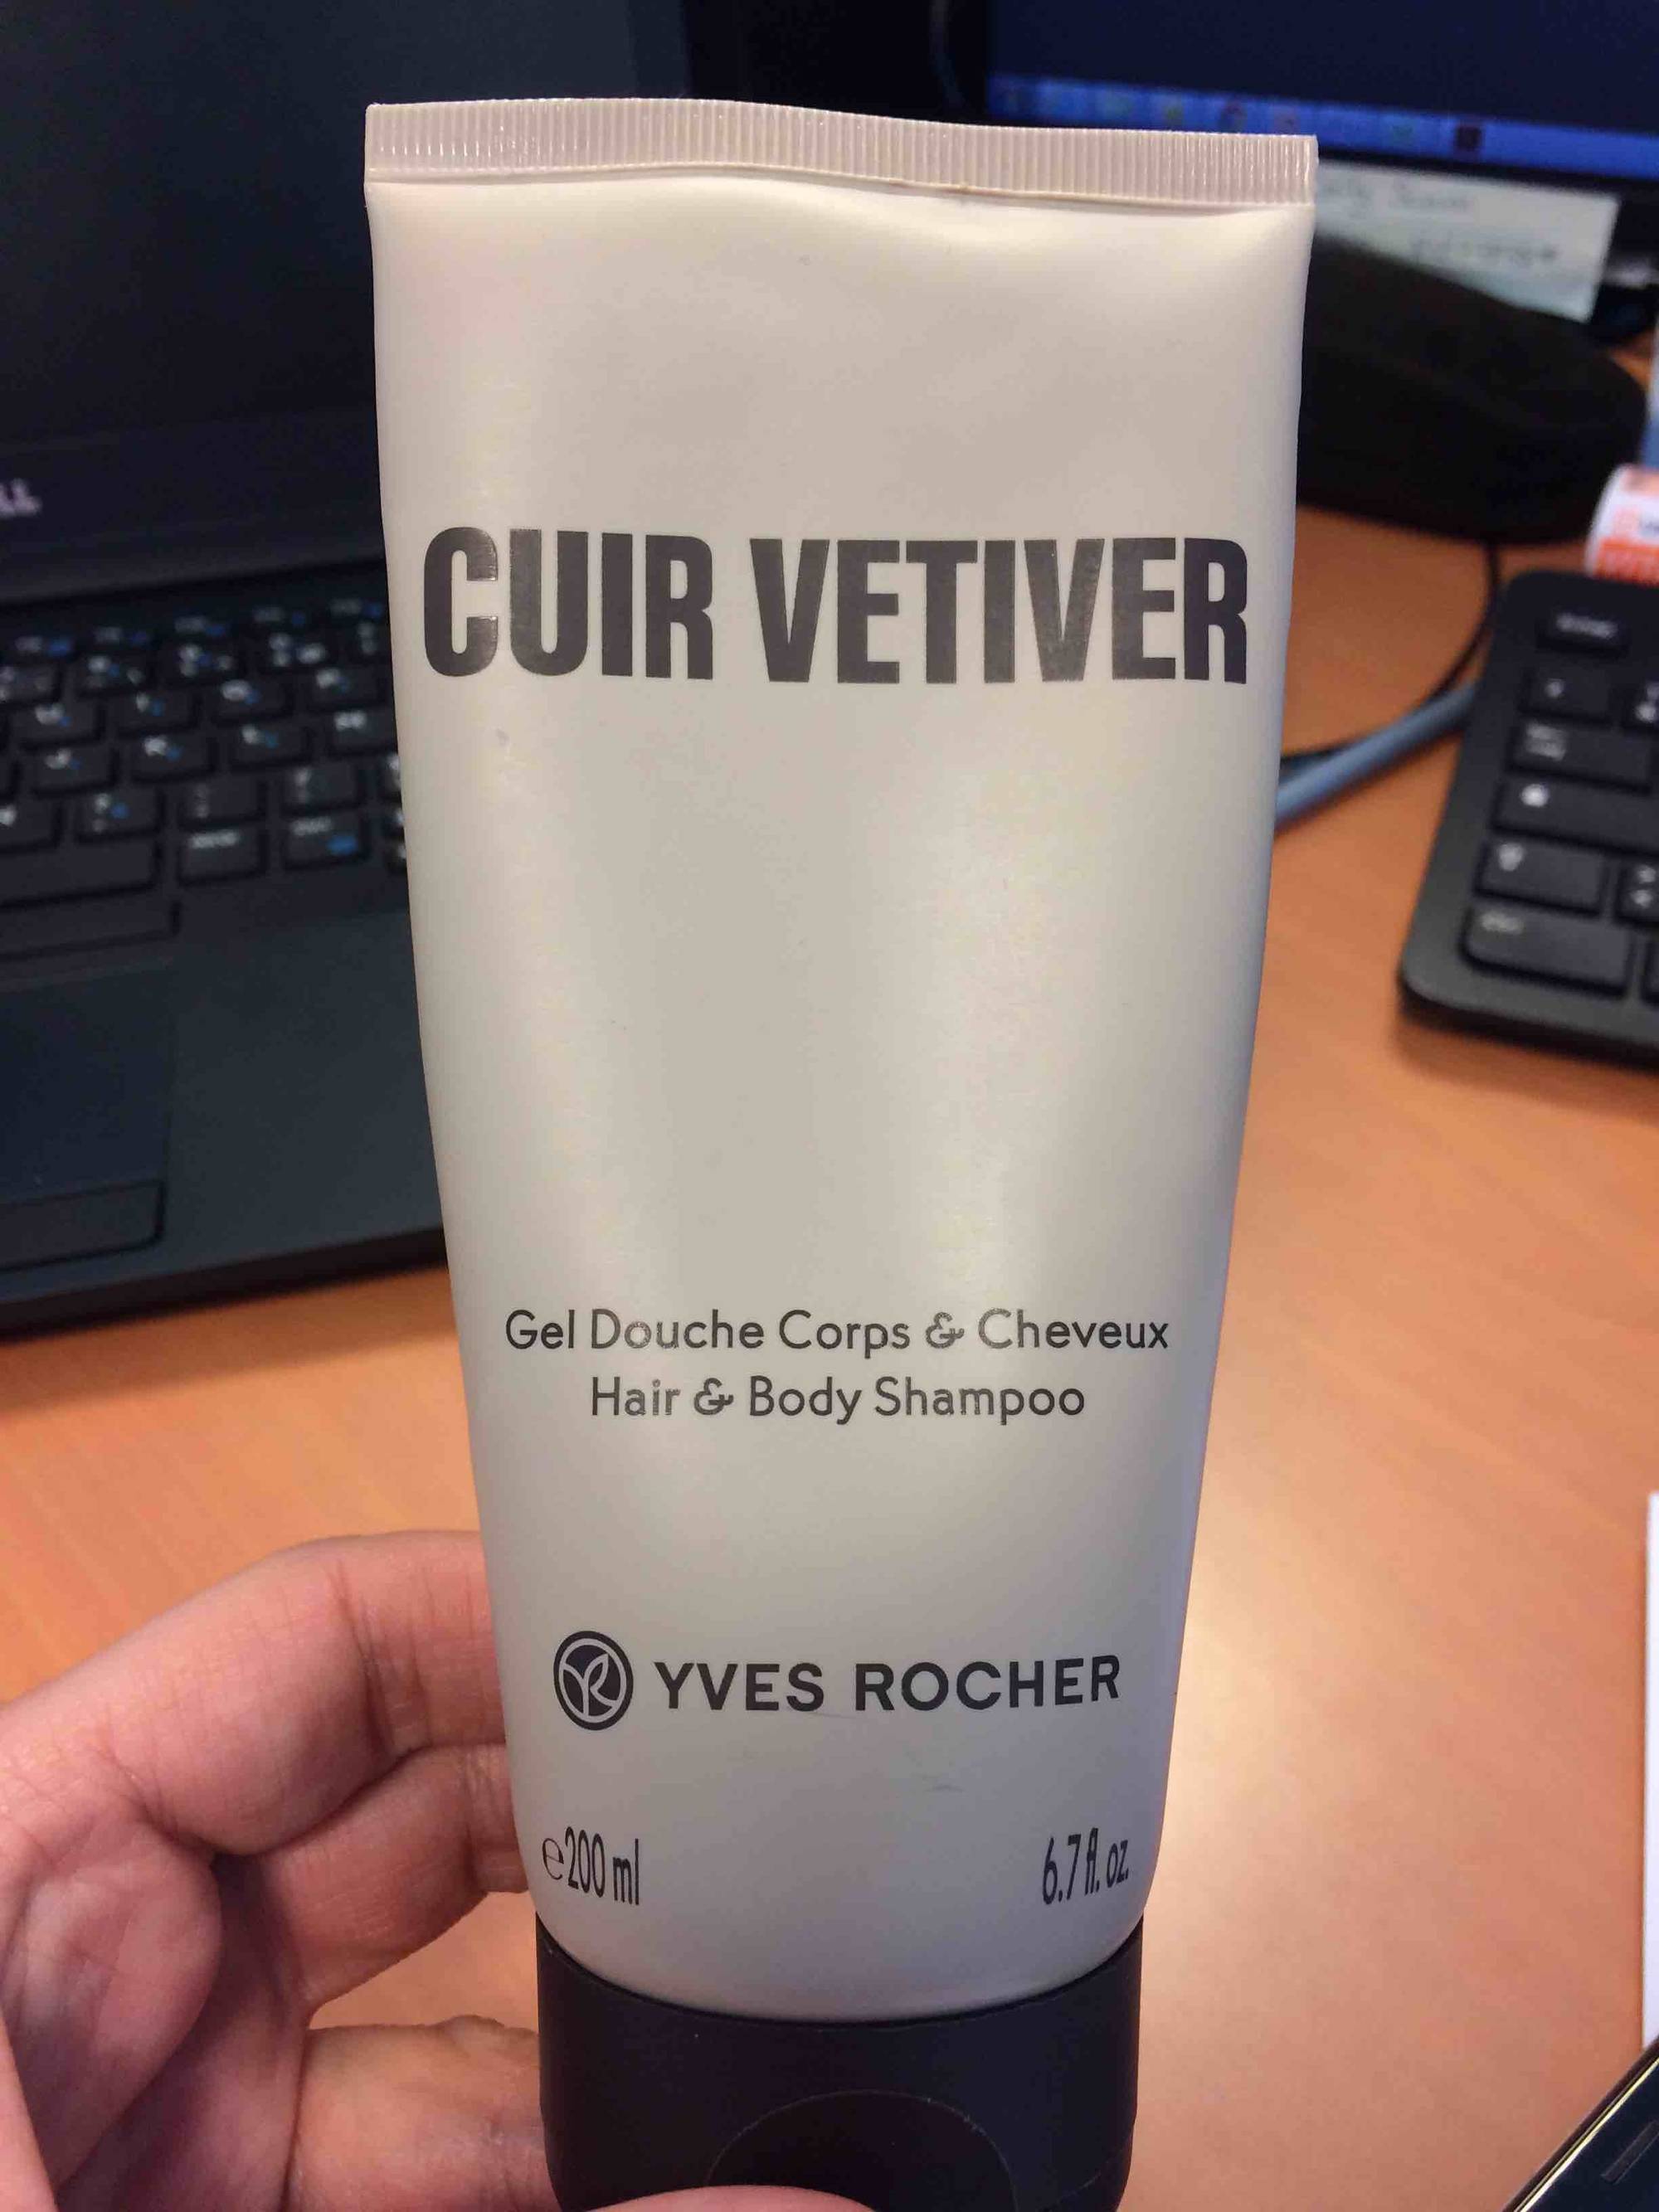 YVES ROCHER - Gel douche corps & cheveux